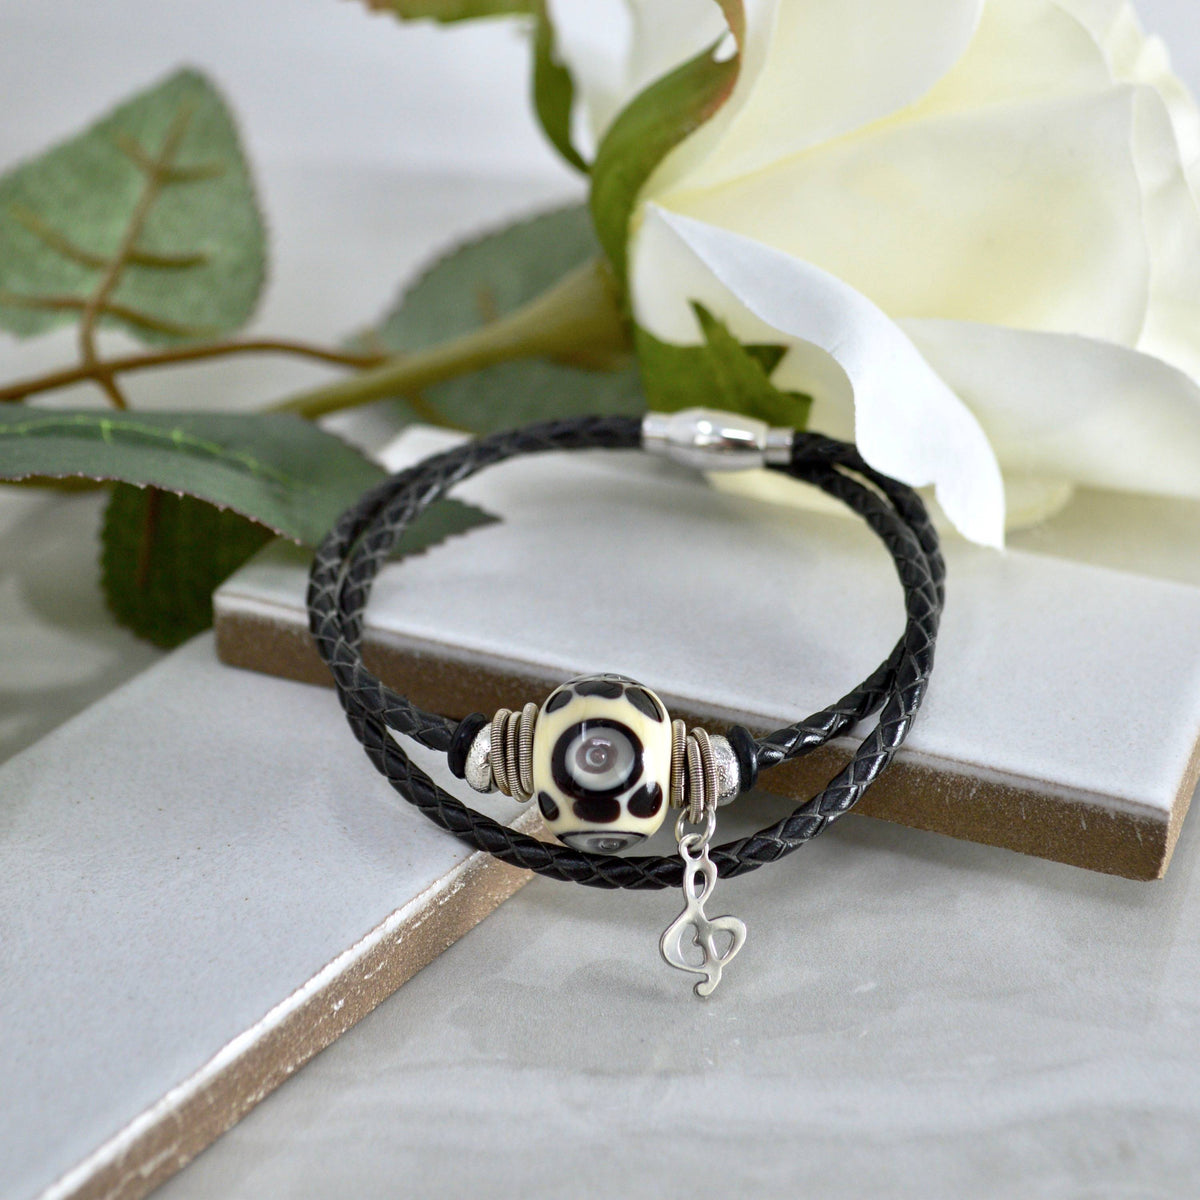 Murano Glass Bead Bracelet With Charm, Leather Band, Made In Italy - My Italian Decor